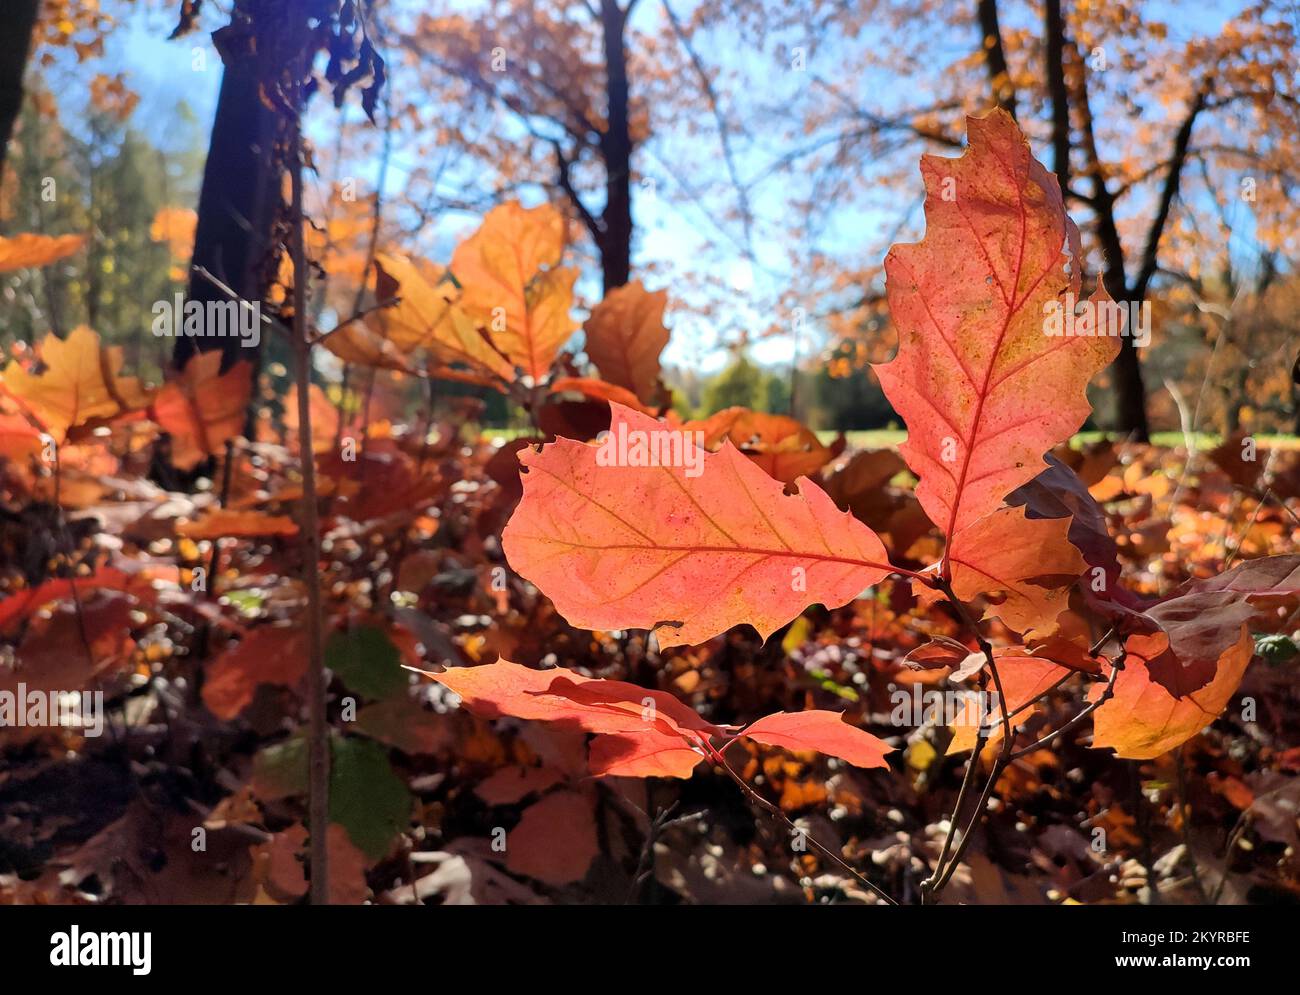 Red oak leaves on background of young oak sprouts with brown leaves, trees and blue sky brightly lit by sun and on sunny autumn day in forest. Backdrop. Natural environment background Stock Photo